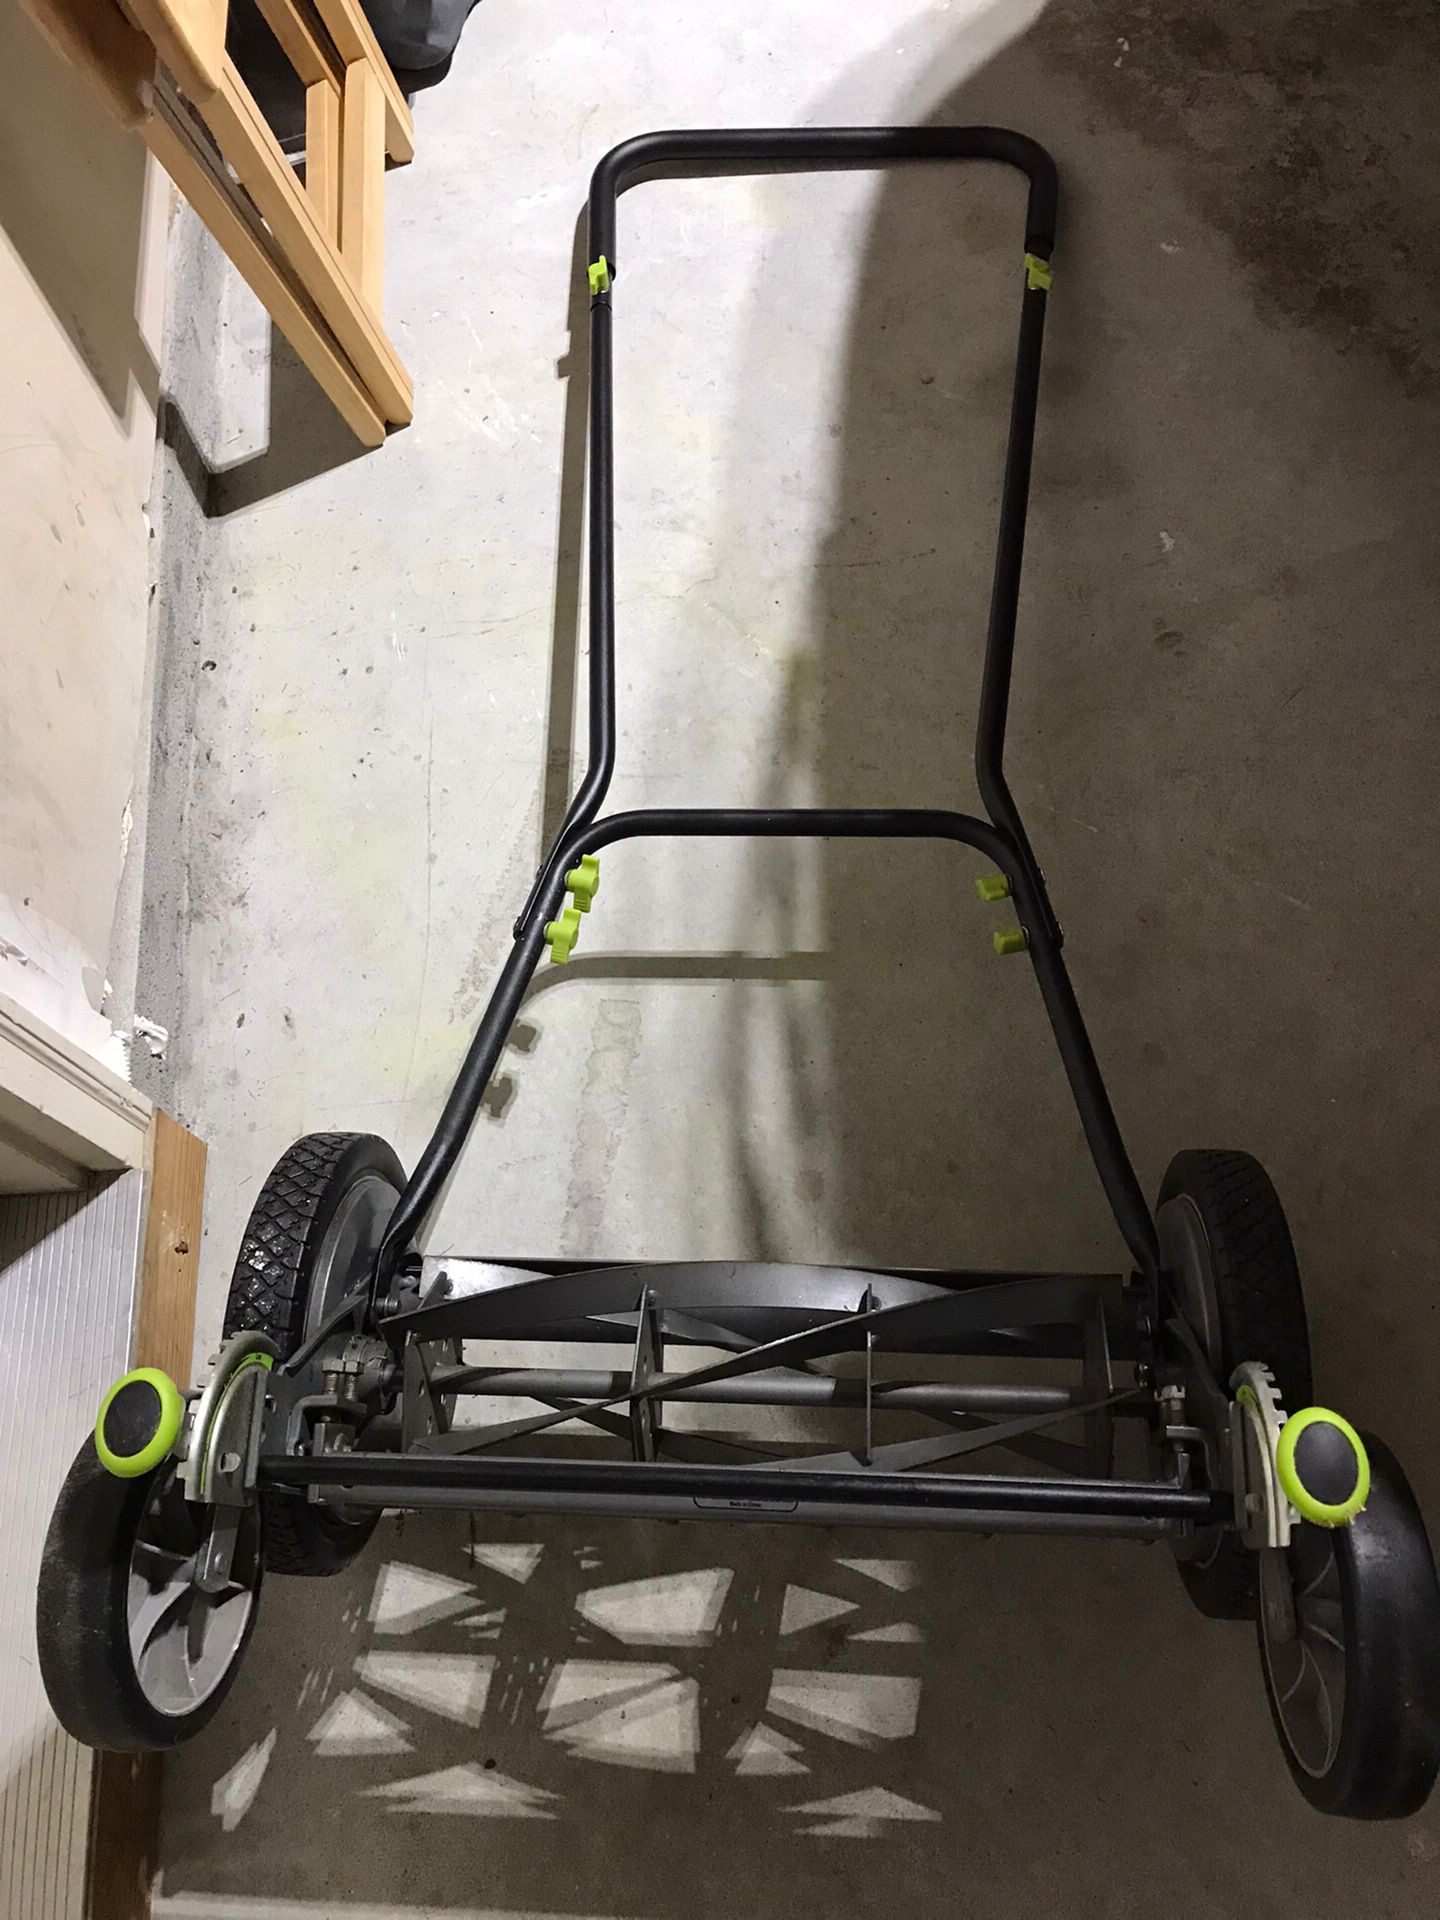 16 Inch Earthwise Reel Mower for Sale in Brentwood, NC - OfferUp